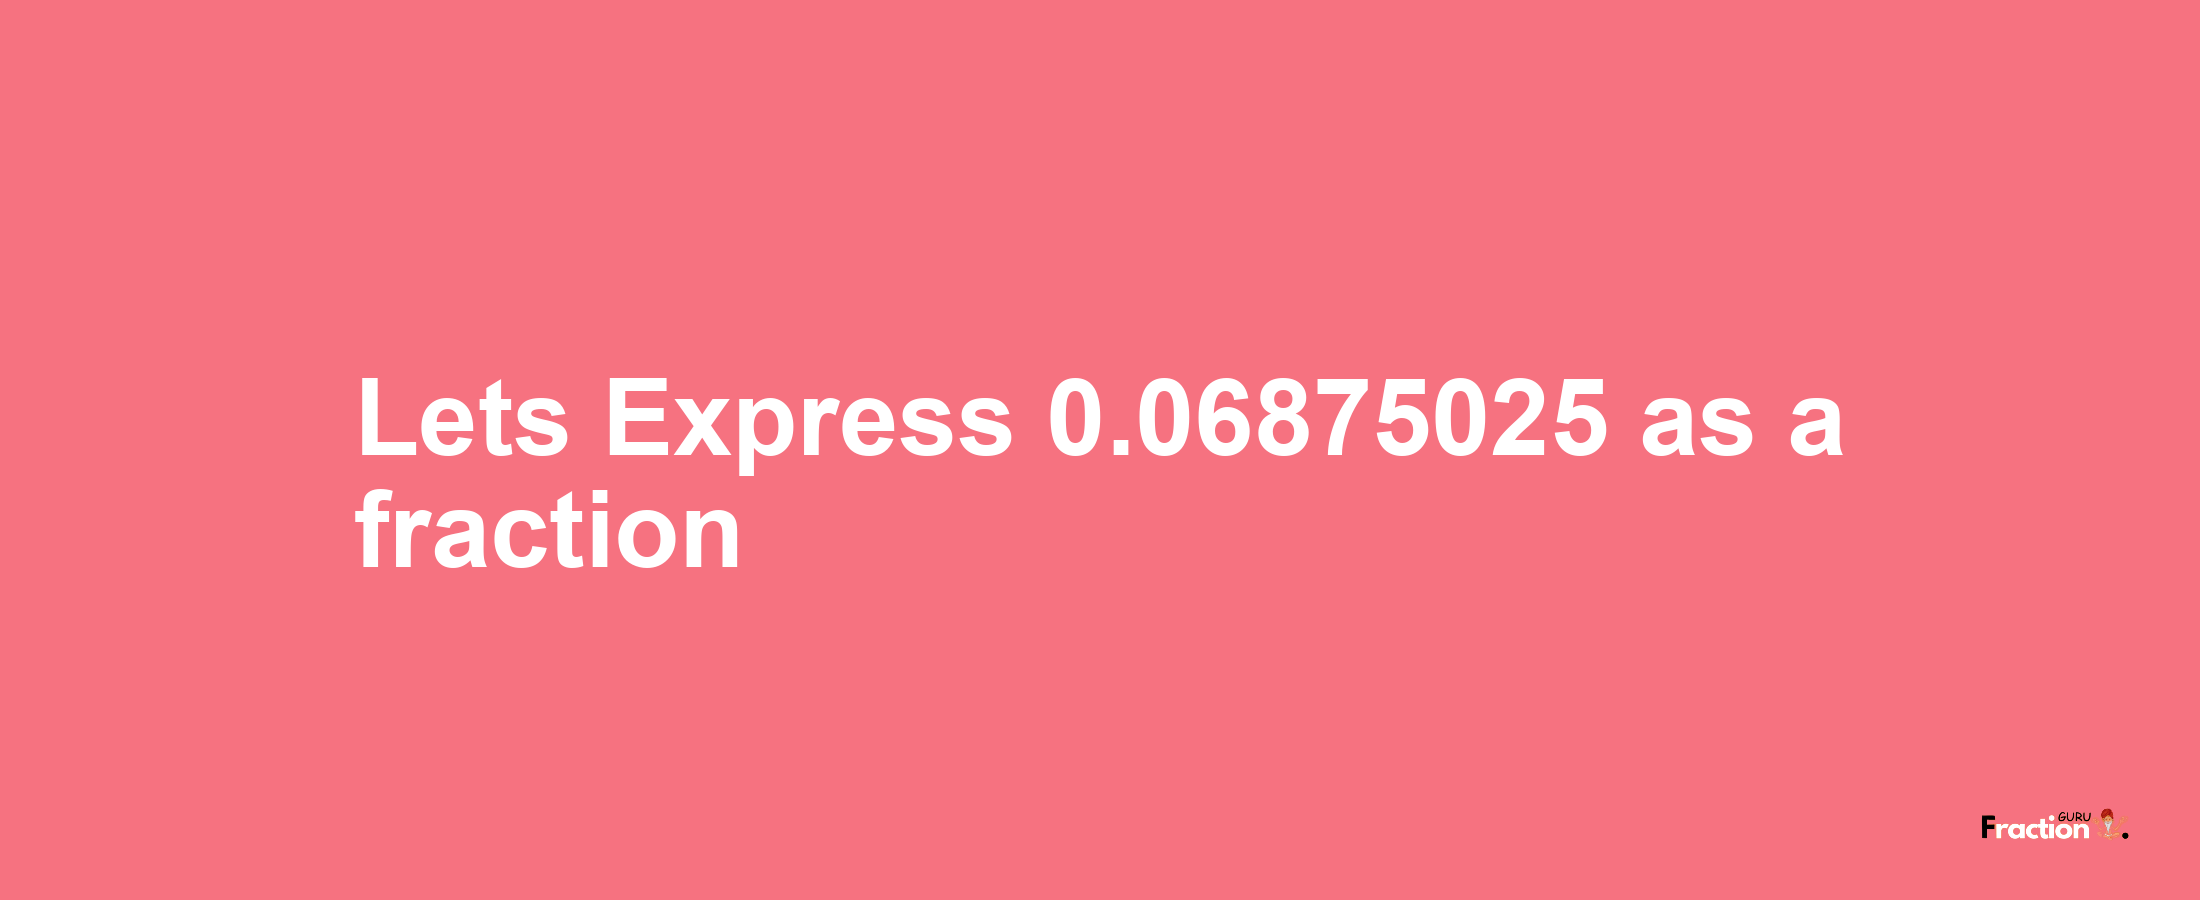 Lets Express 0.06875025 as afraction